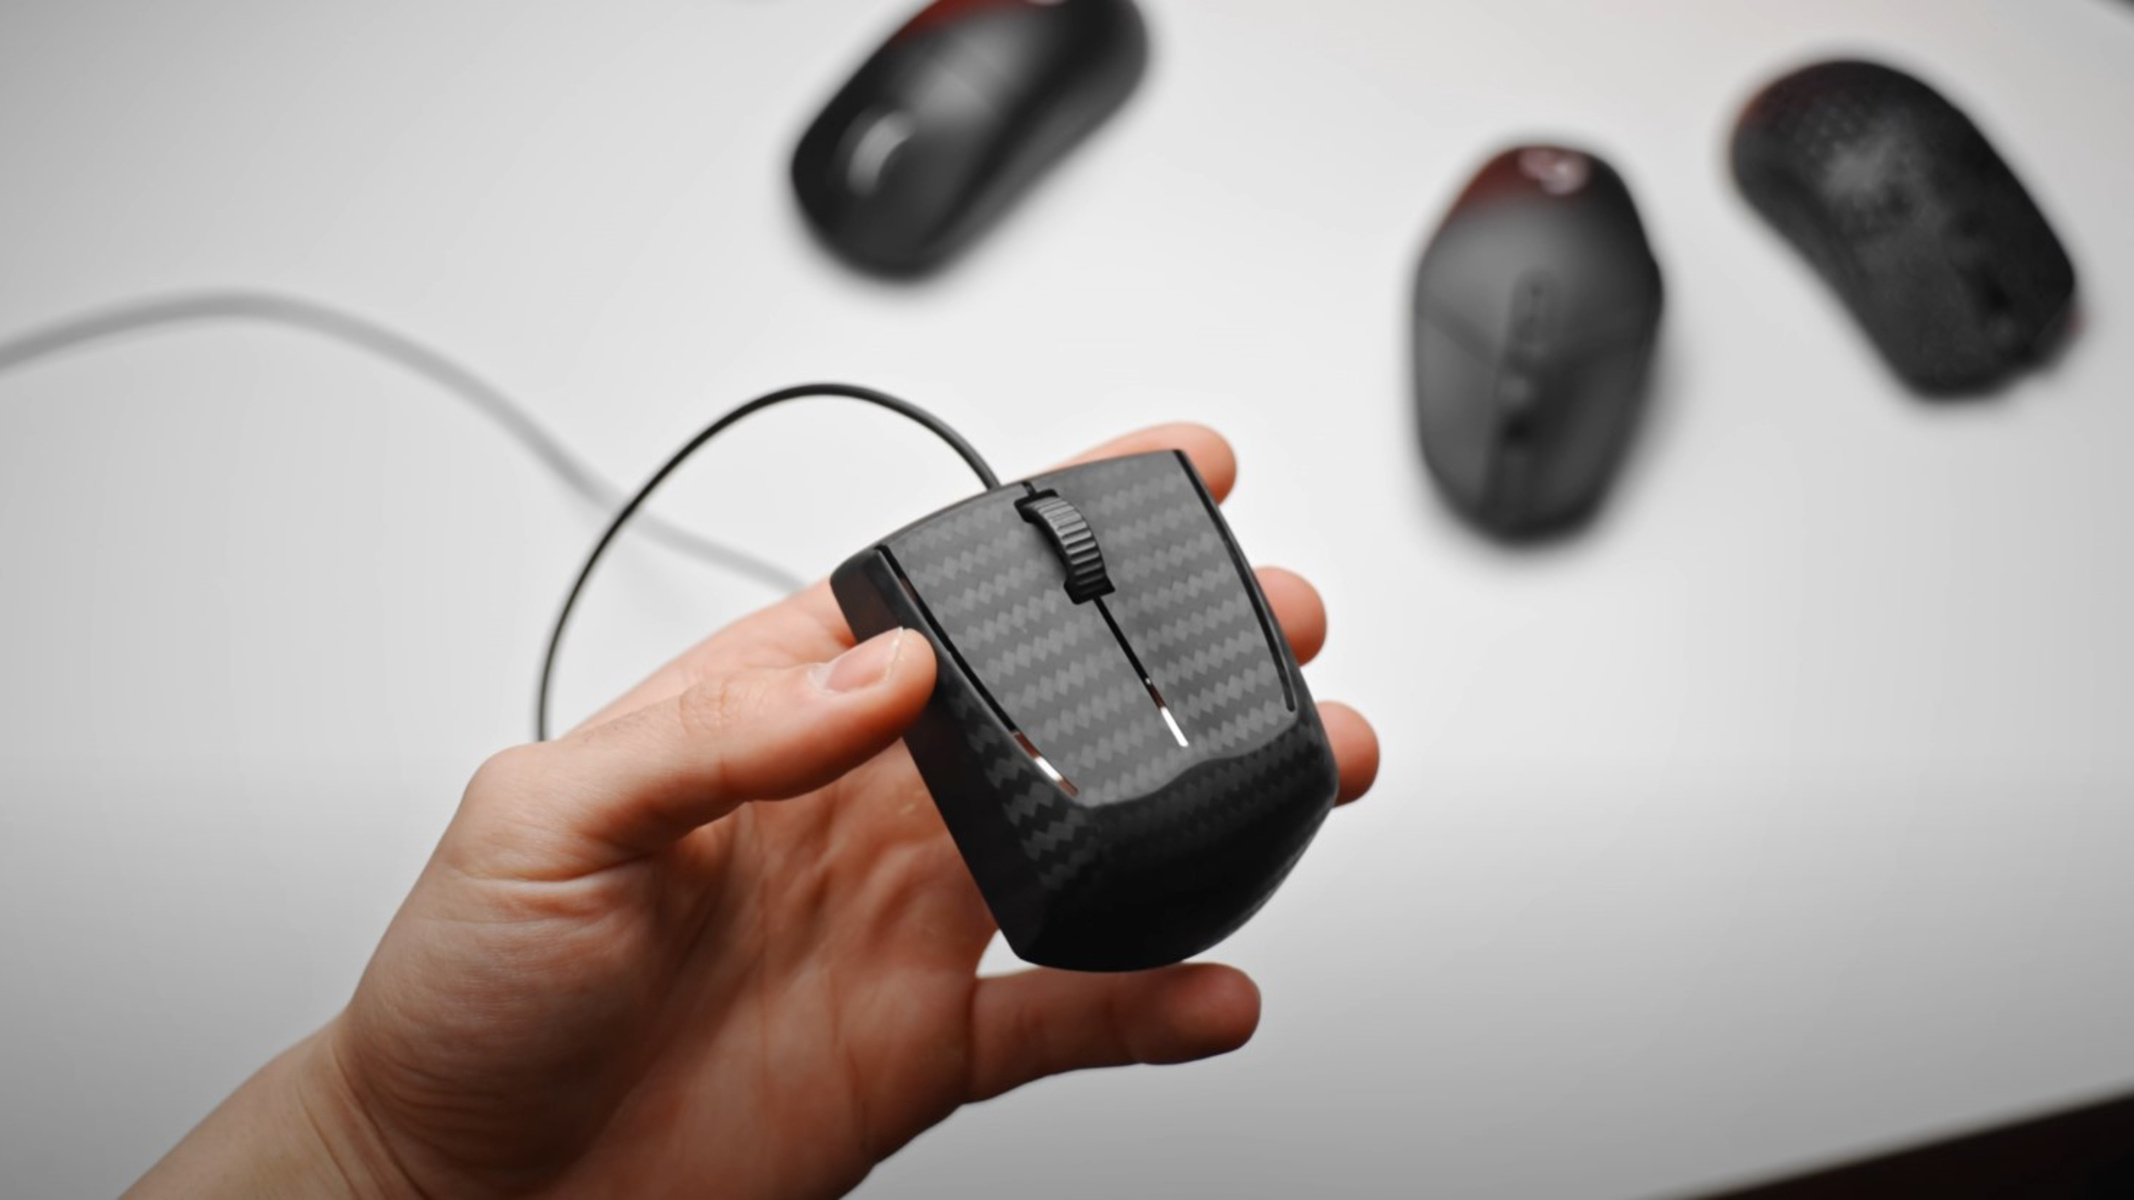 What Is The Lightest Gaming Mouse?